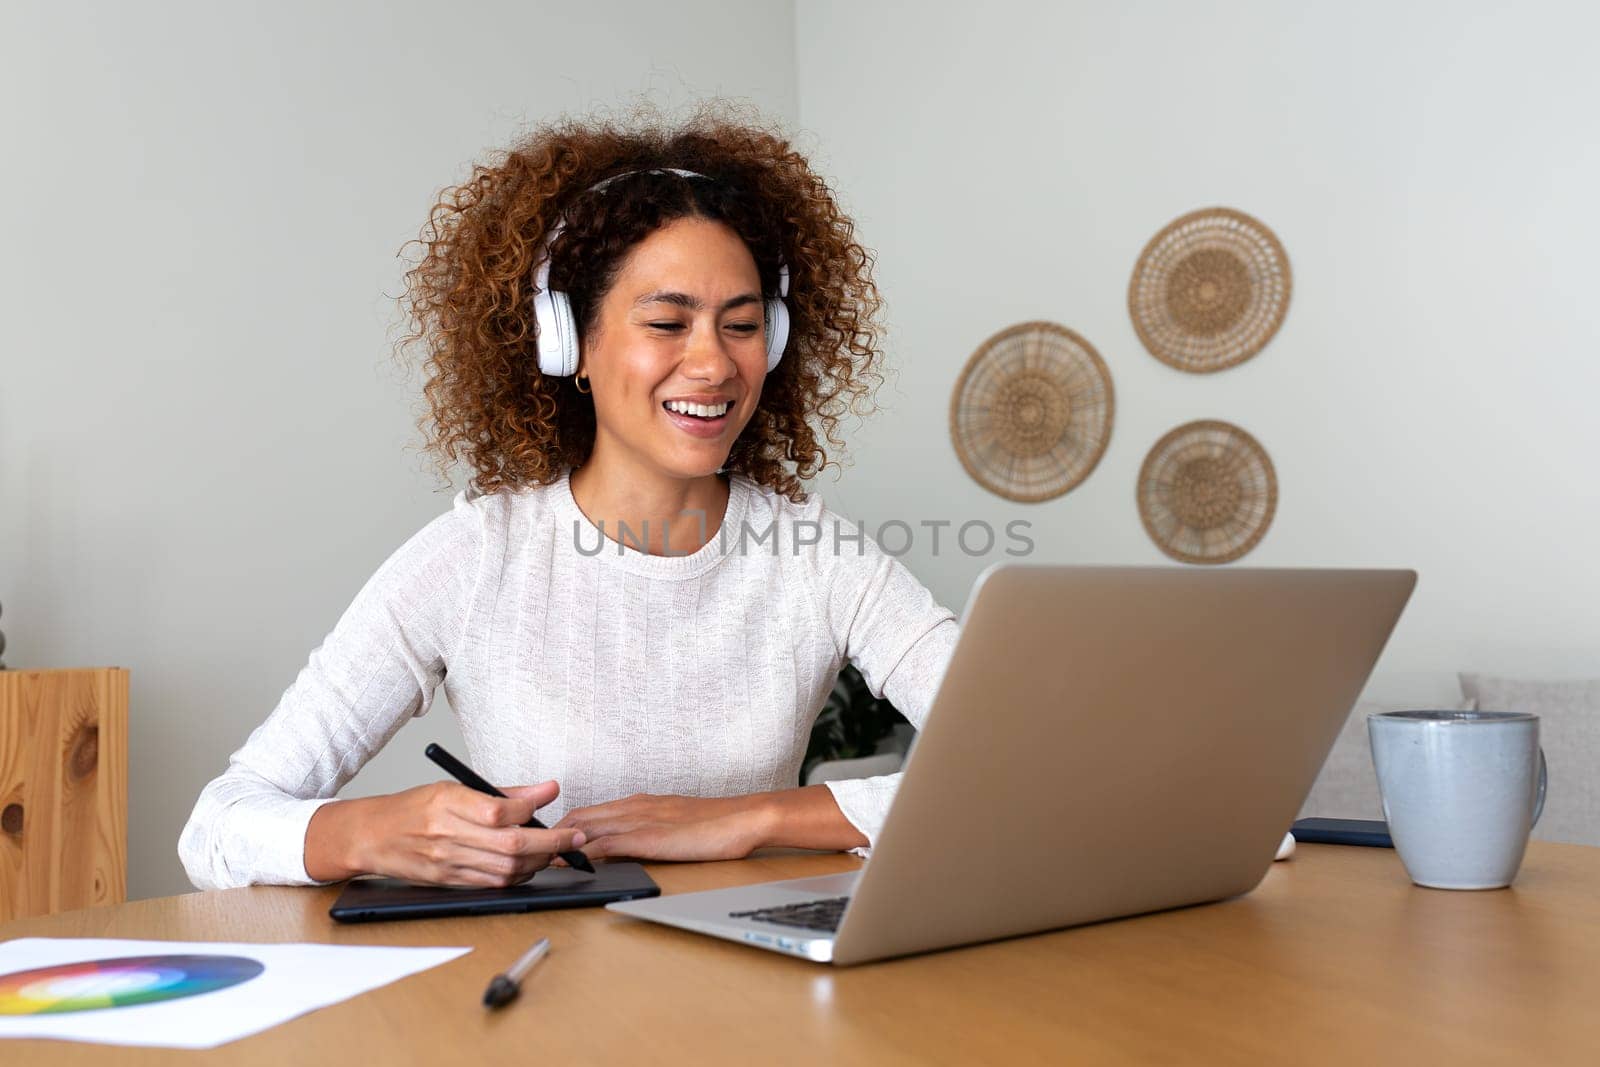 Multiracial happy female graphic designer working at home using laptop and graphic tablet. Creativity and technology concept.